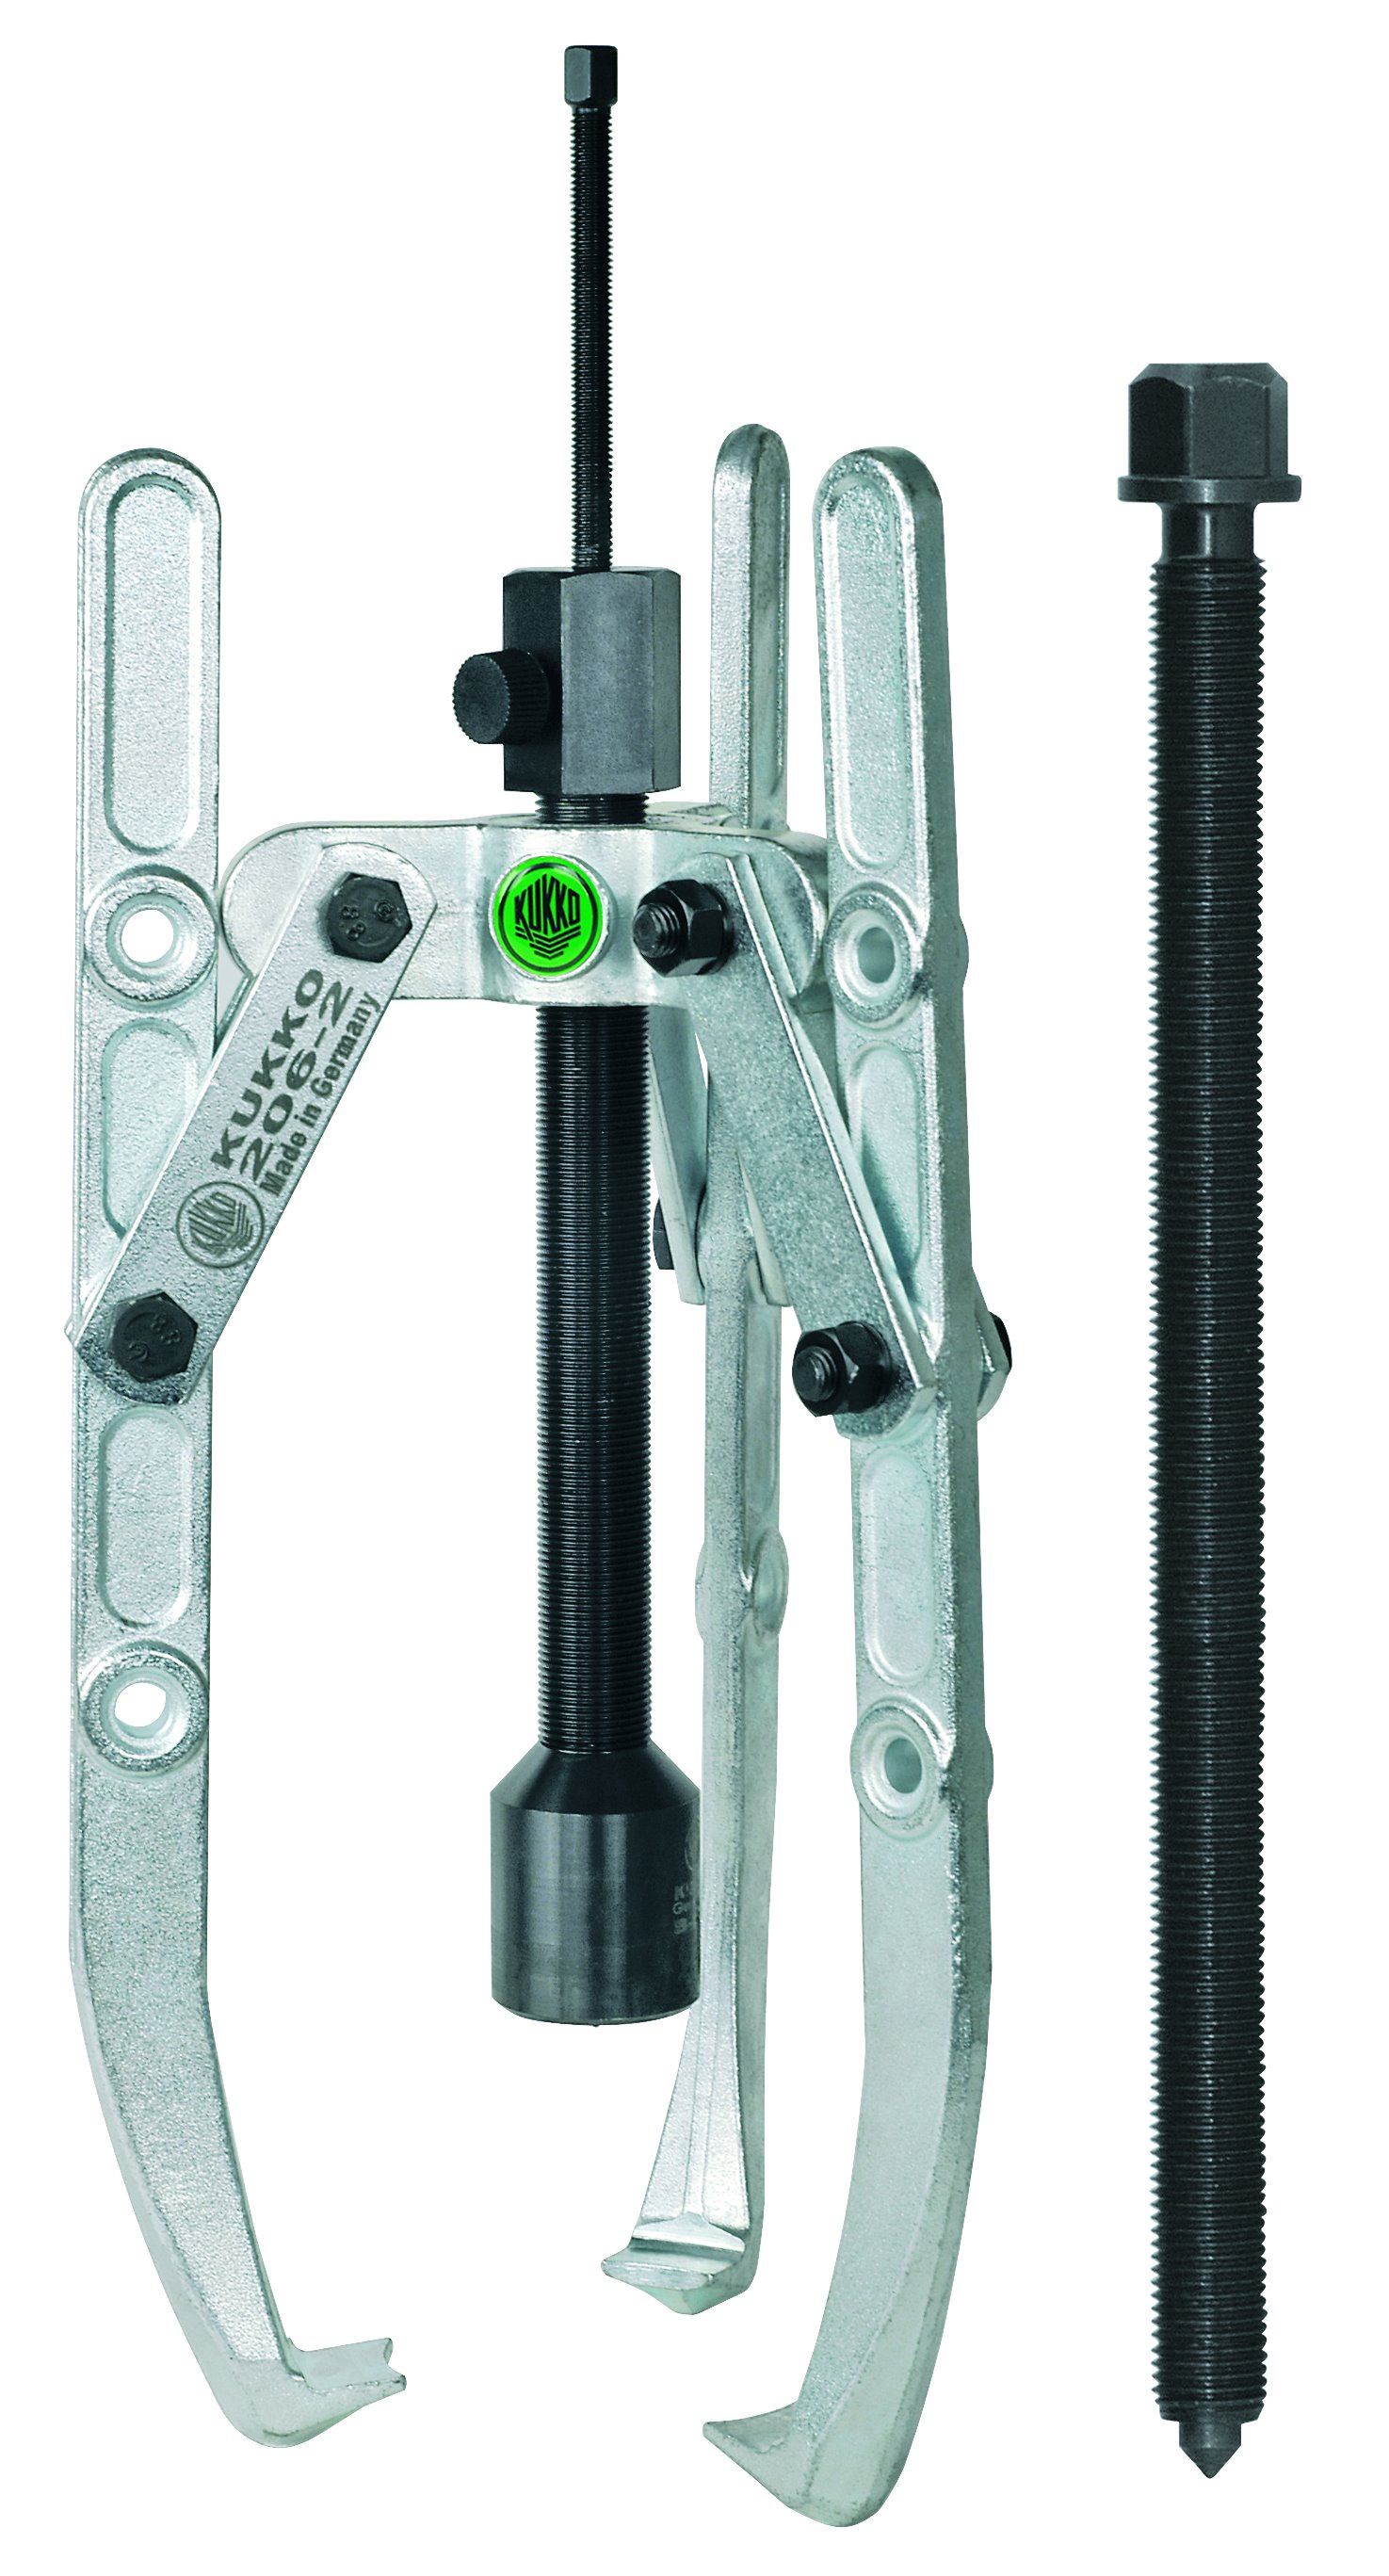 Universal 3-jaw puller with adjustable reach, long